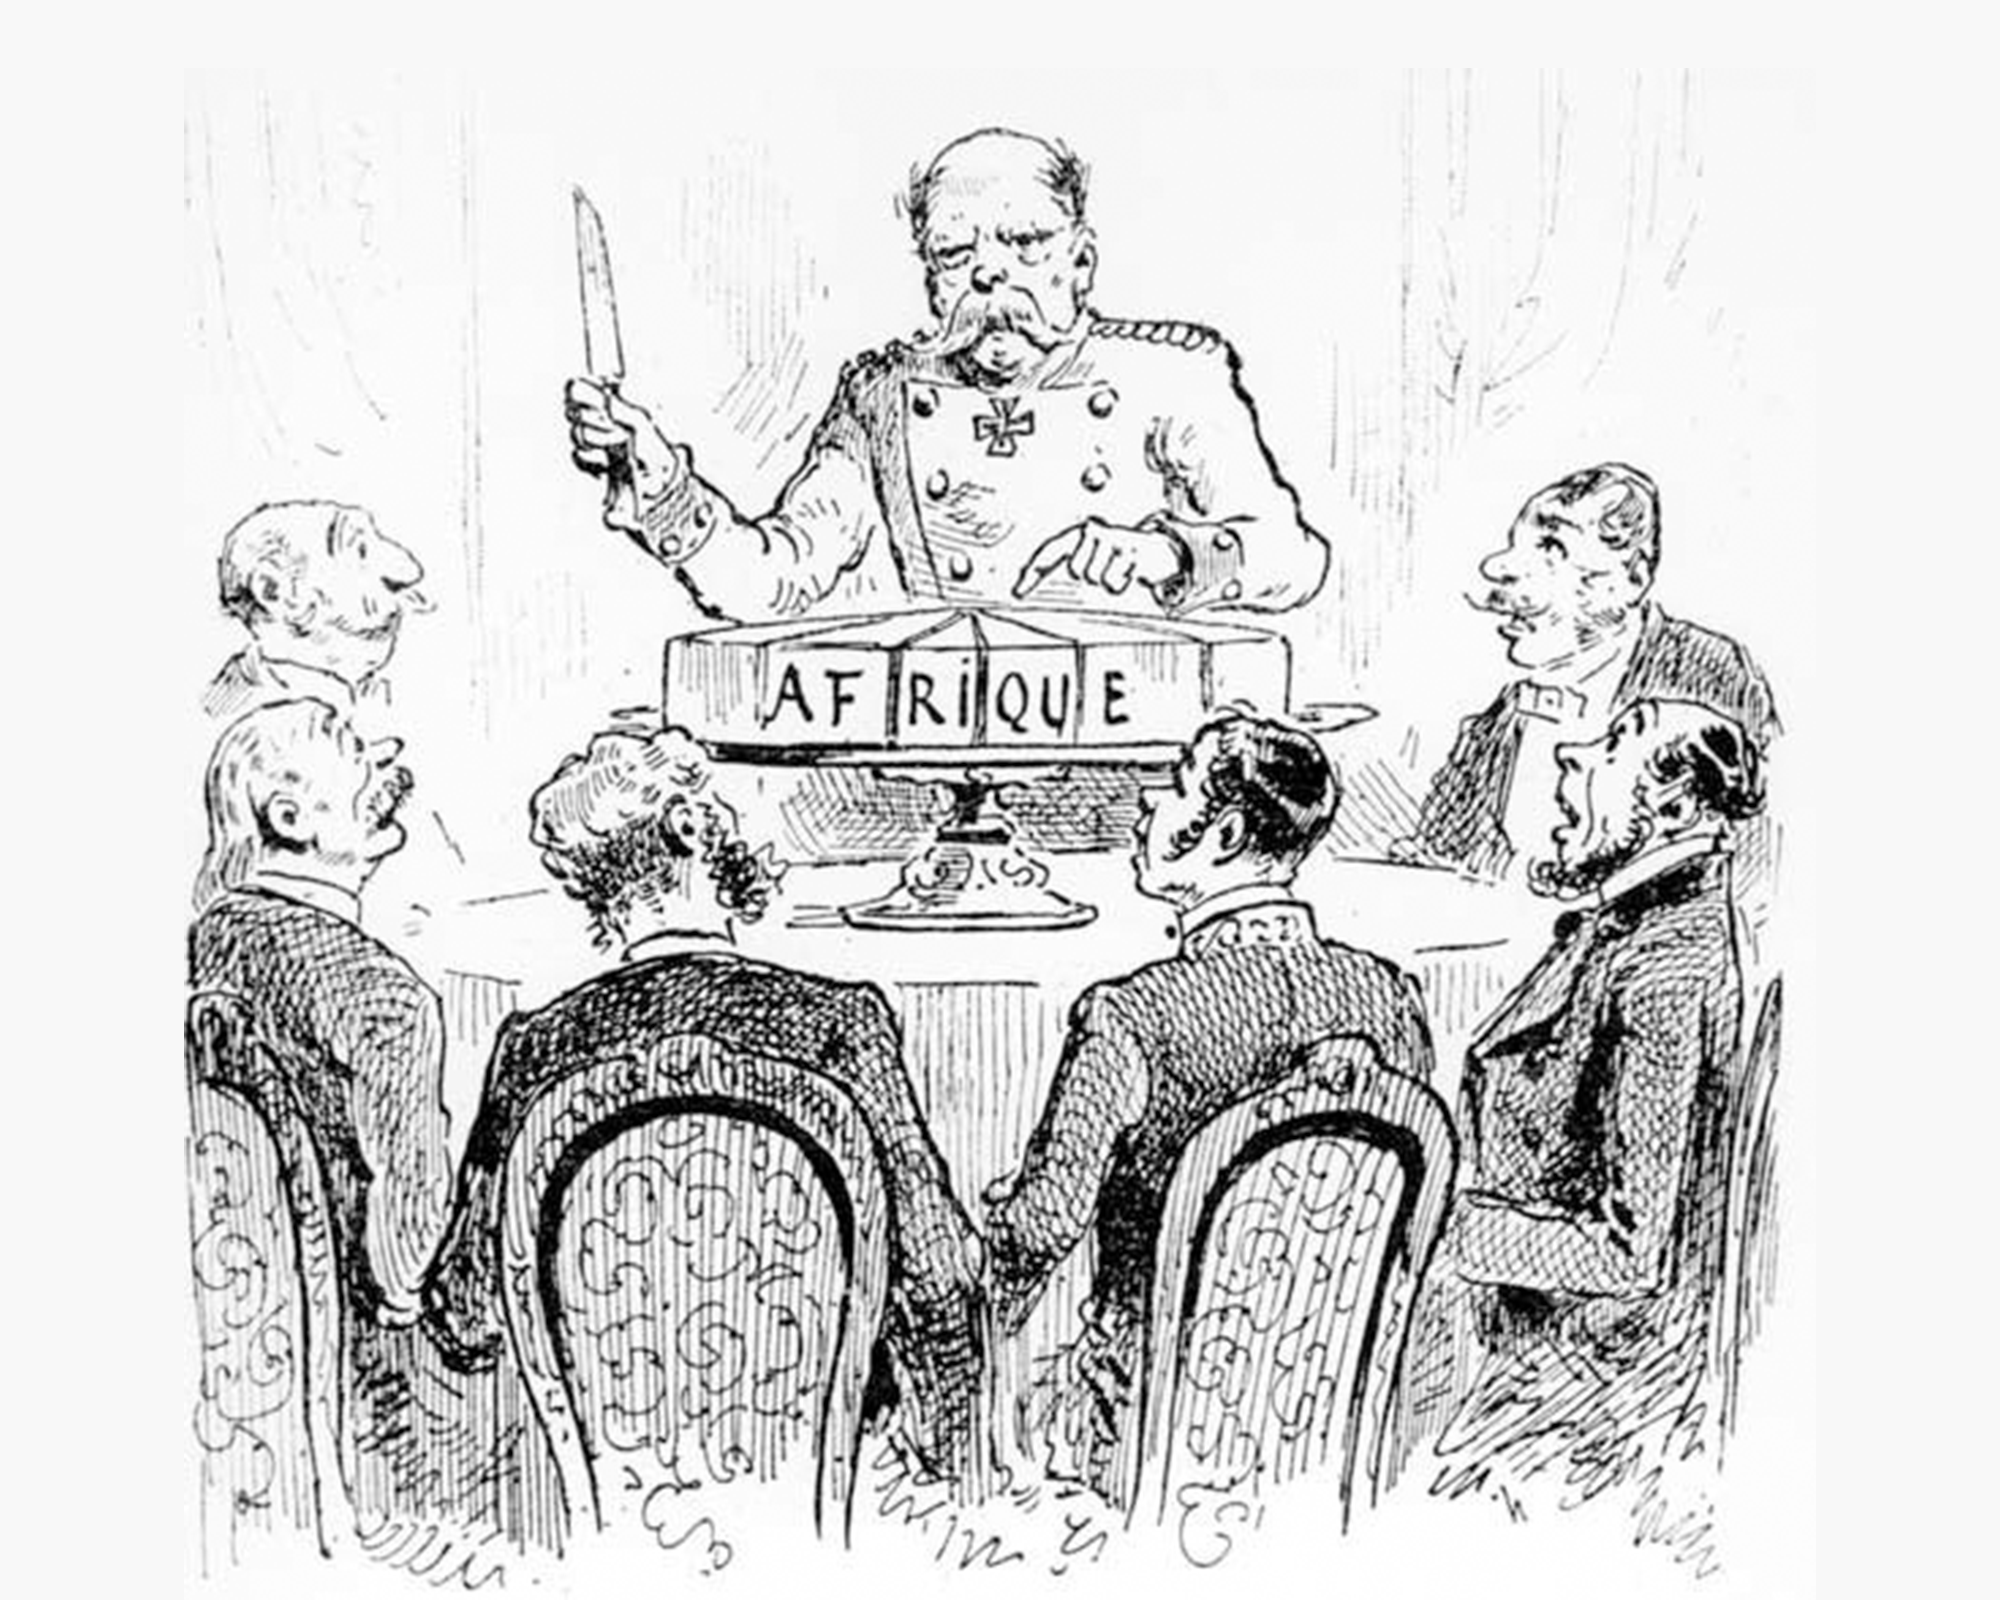 A French political cartoon depicting German Chancellor Otto von Bismarck slicing up cake labeled 'Africa' at the Berlin Conference in 1884.